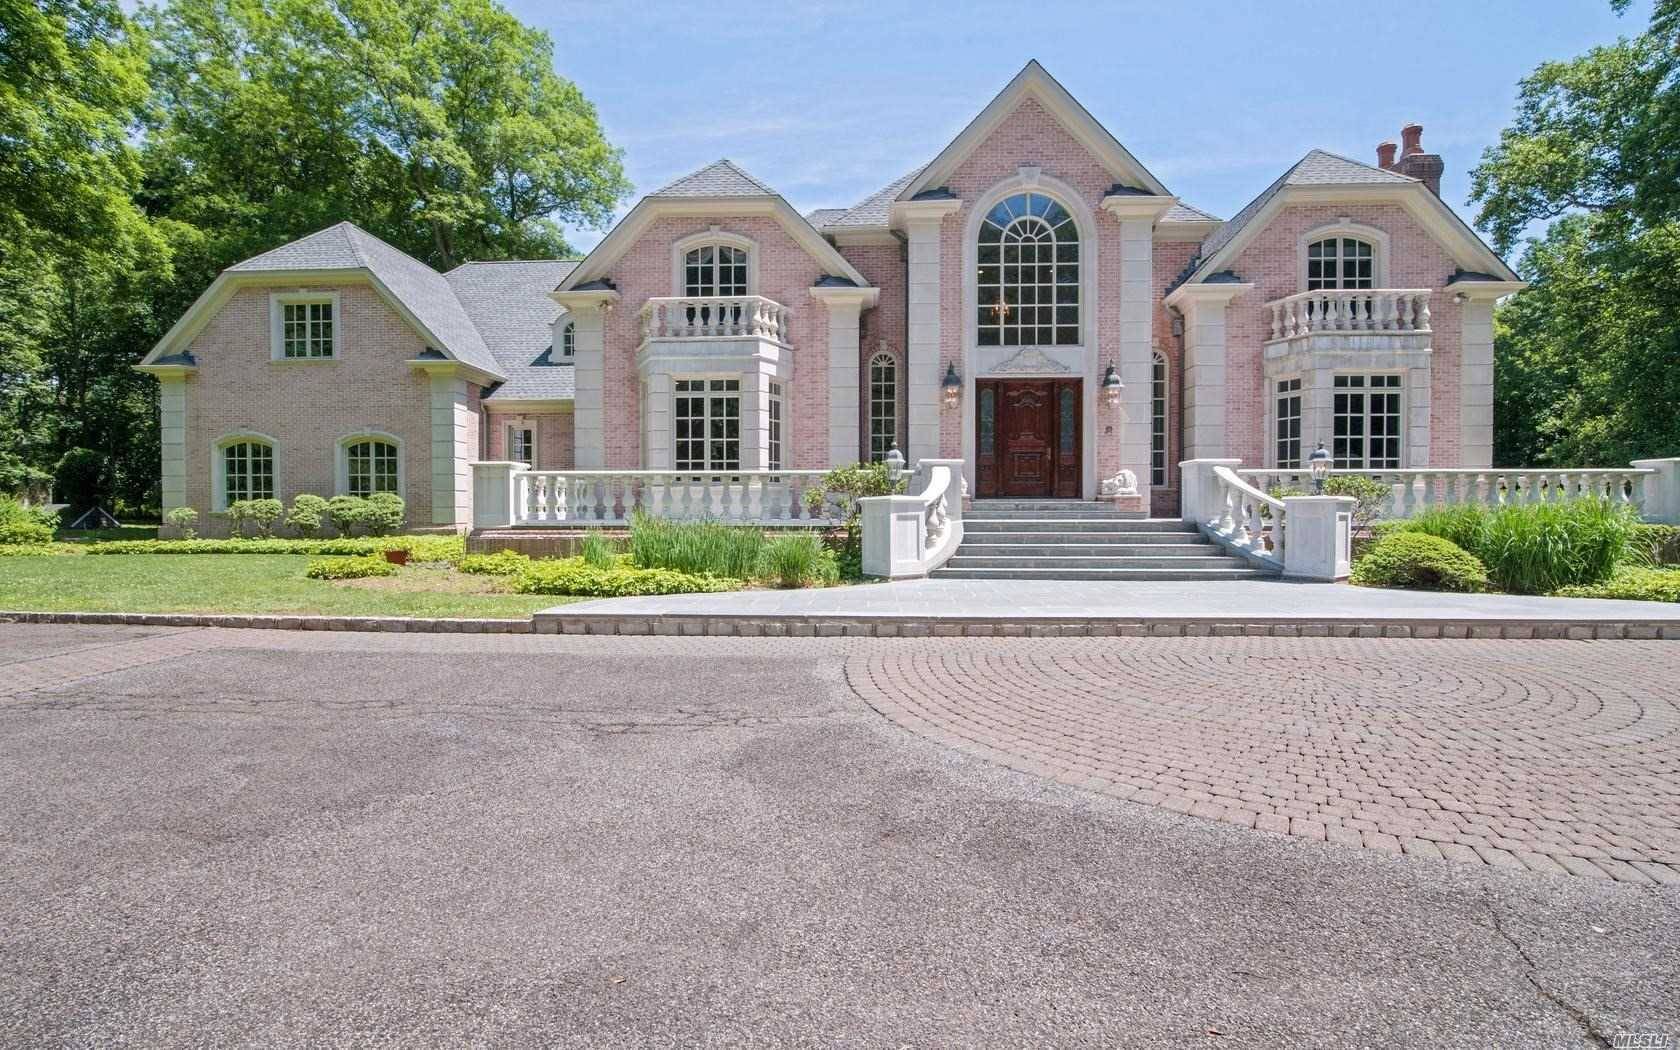 Magnificent Brick Manor Estate Reminiscent Of The Gatsby Era Is Evident In This Unparalleled Opulent And Grand Residence.